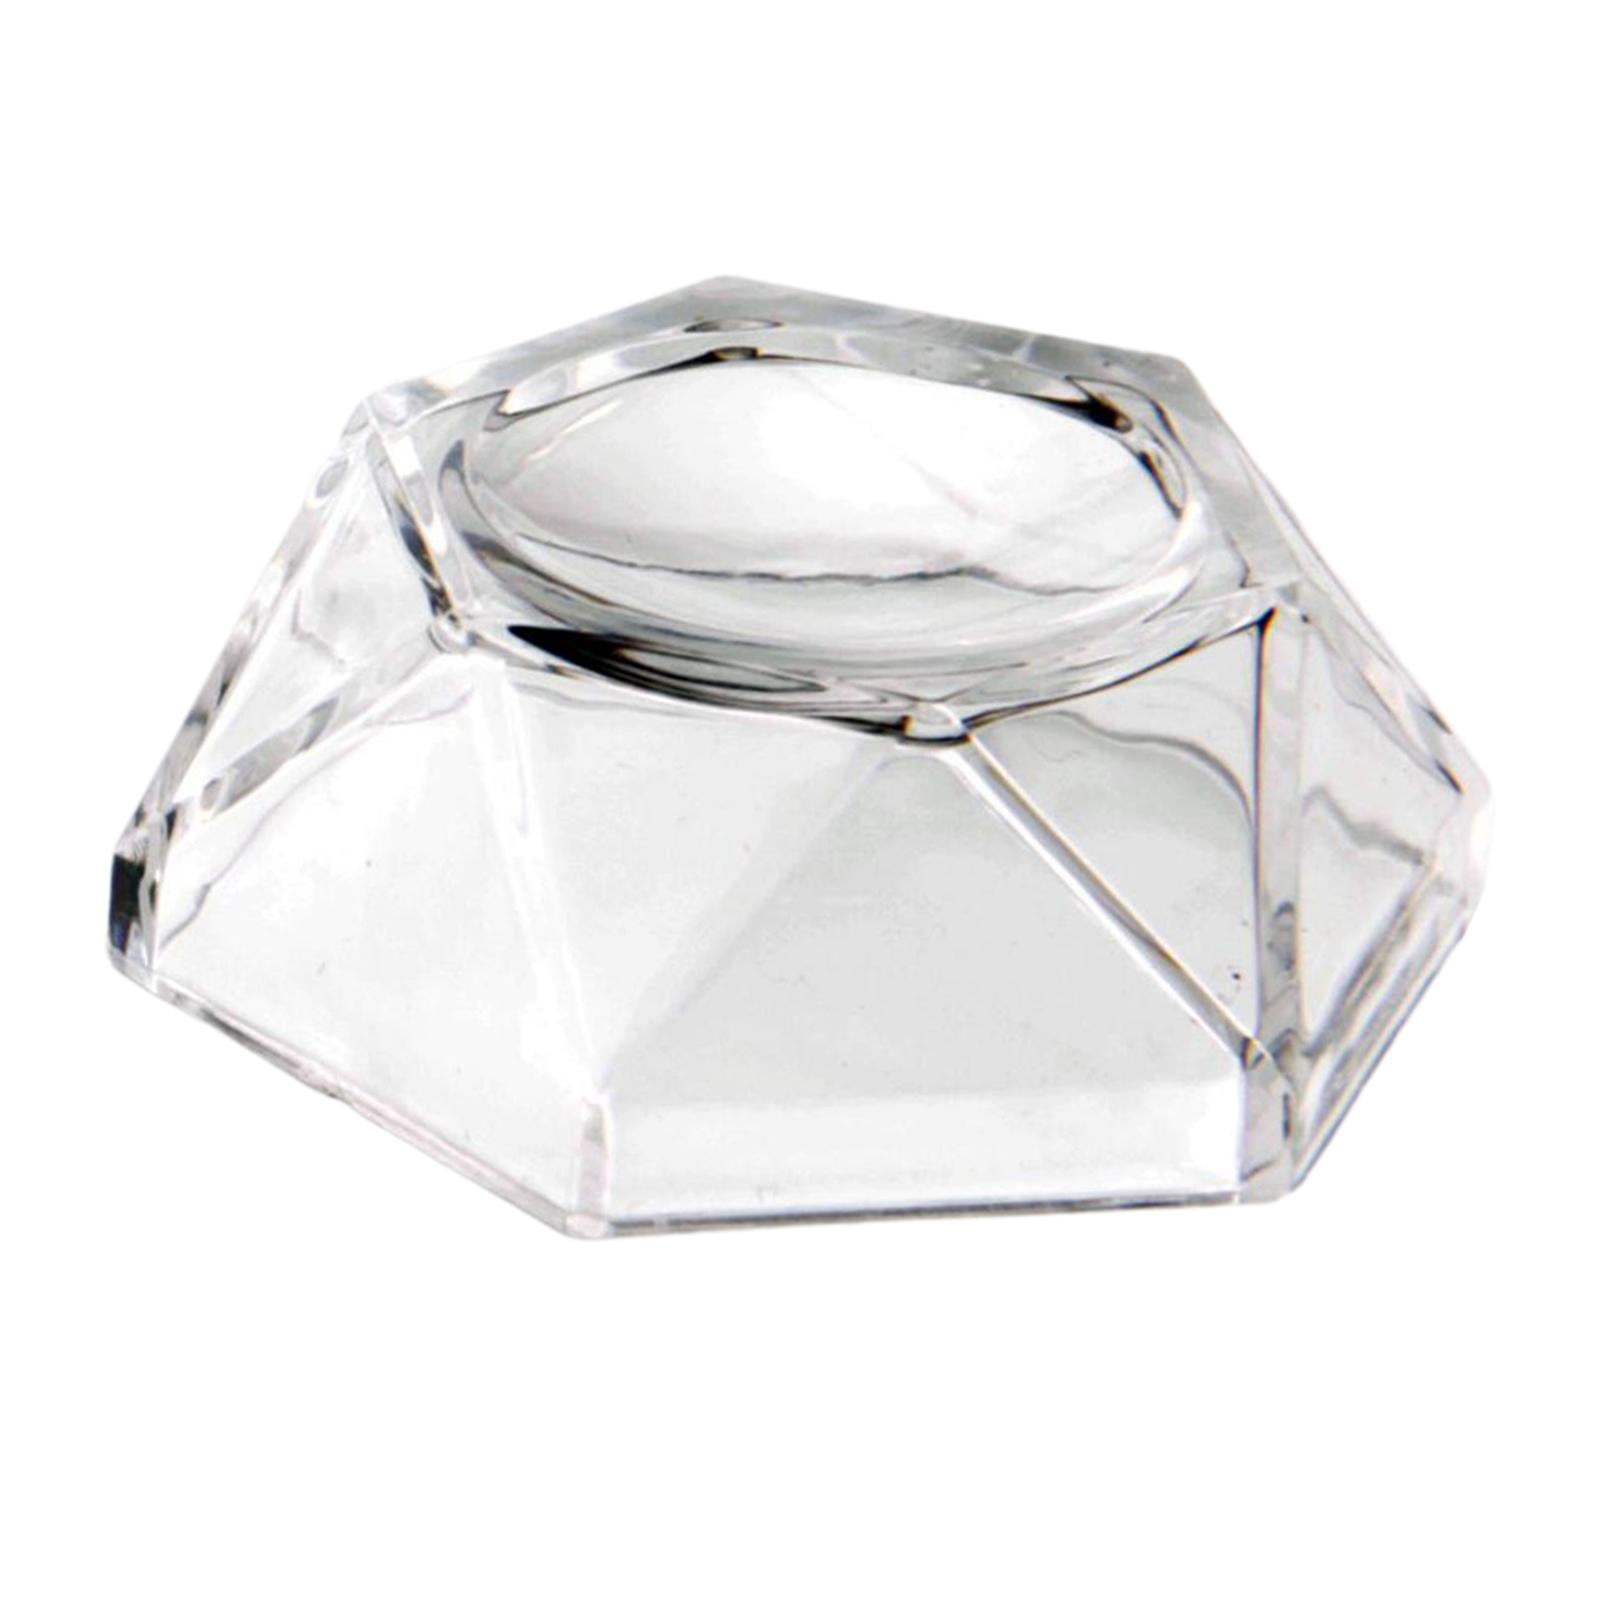 Clear Trapezoid Crystal Ball Display Base Stand Holder For Galss Sphere Stones 